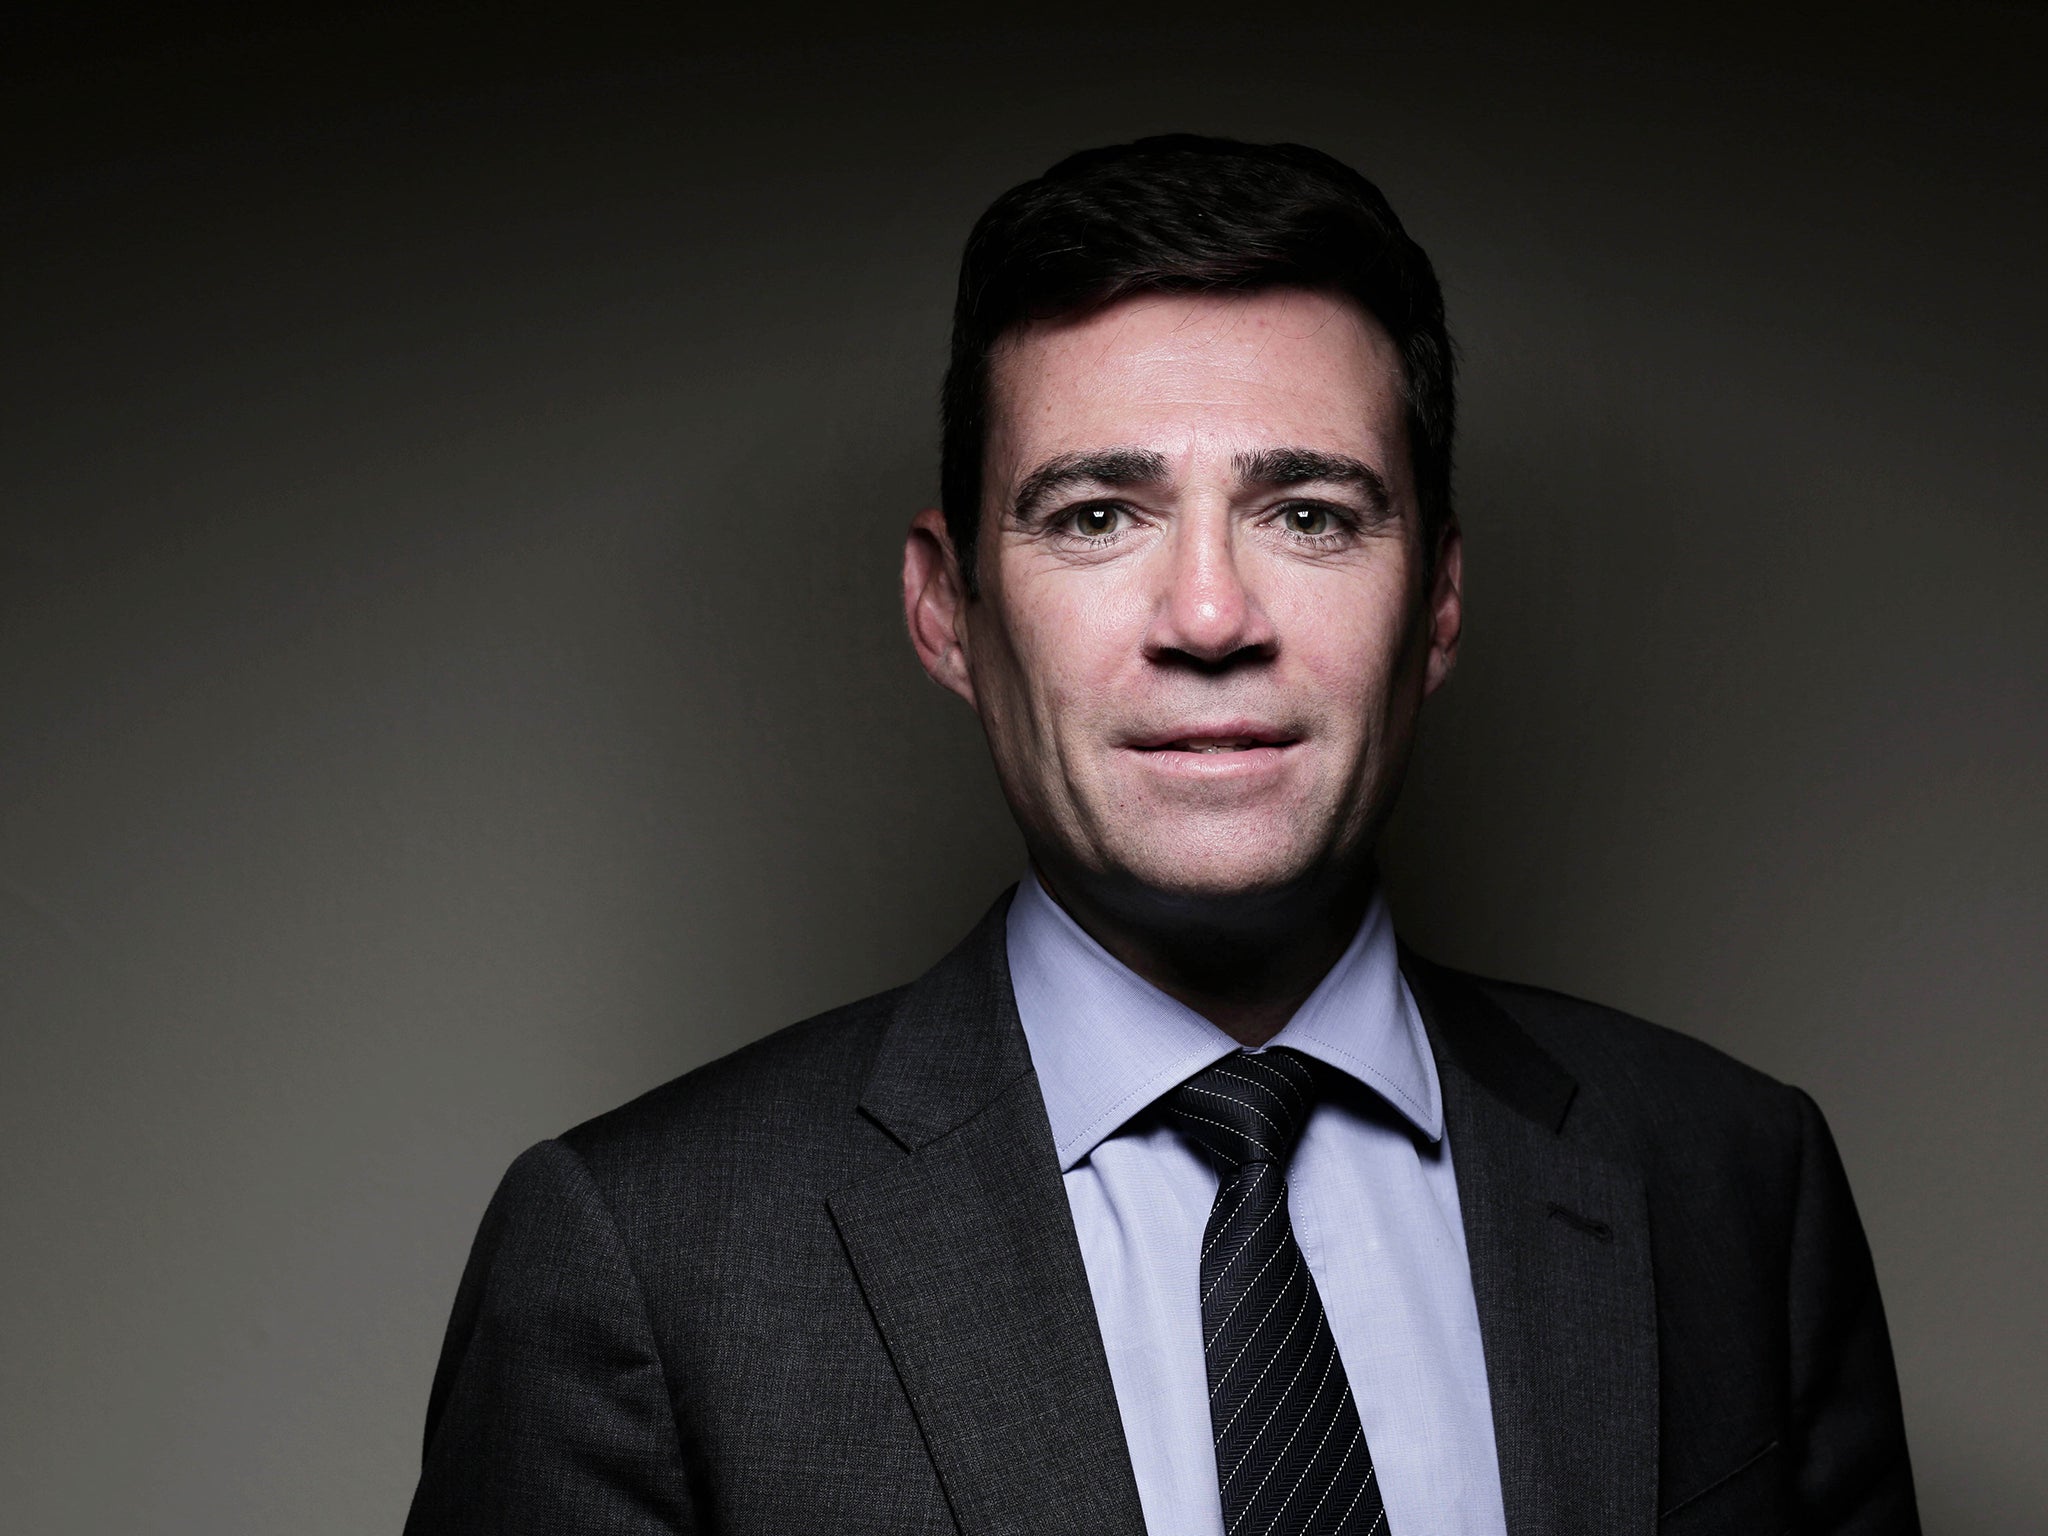 ‘I’m on a bit of a mission’: Andy Burnham, Labour’s shadow Health Secretary, wants to create an ever-larger NHS